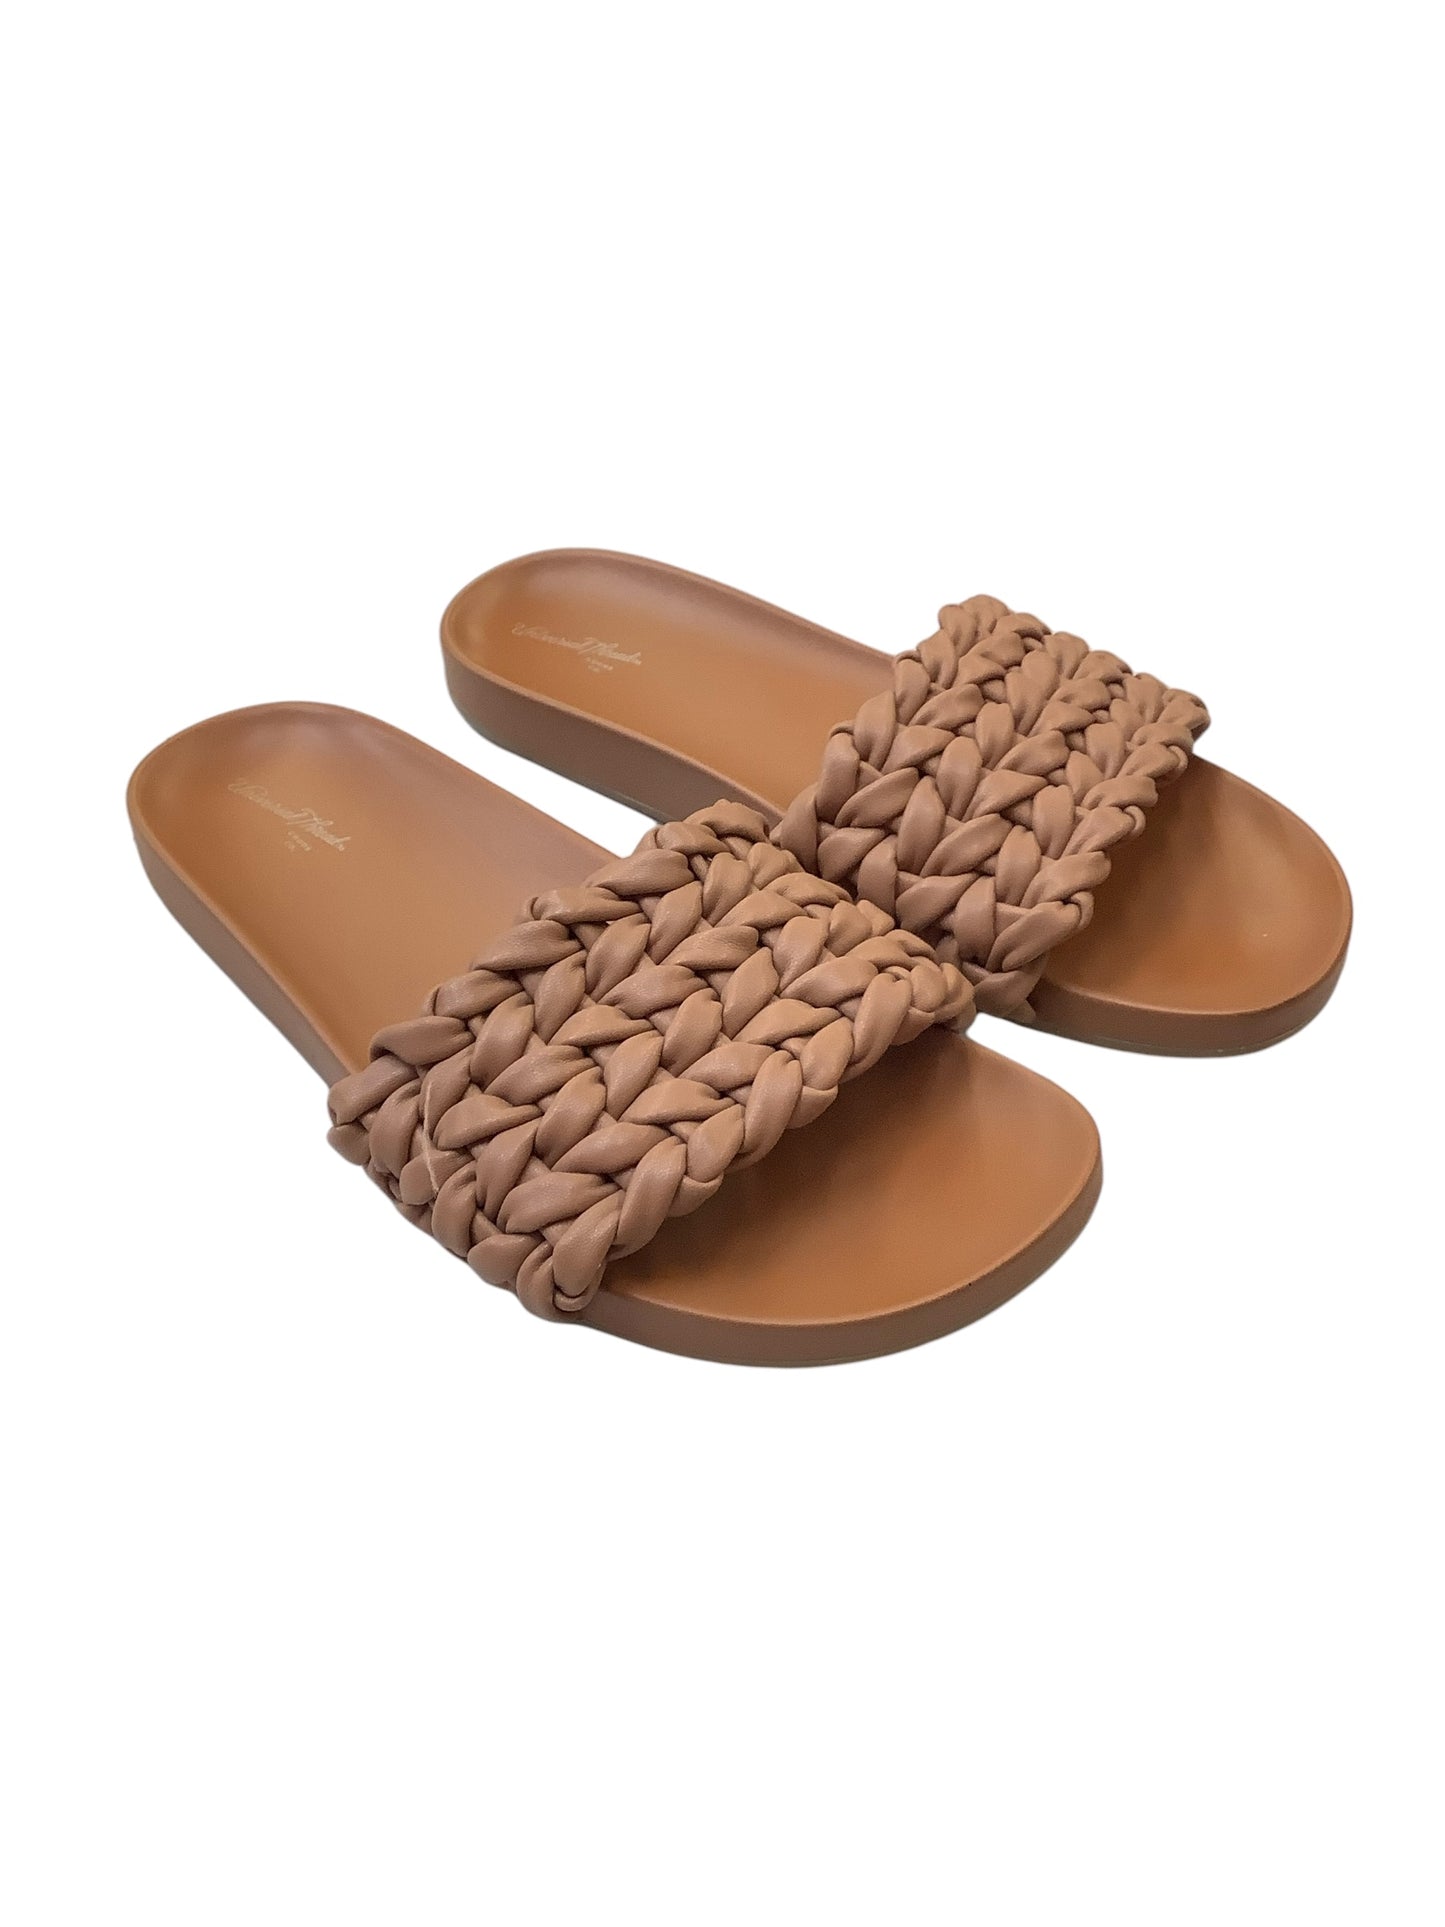 Shoes Flats Mule & Slide By Universal Thread  Size: 8